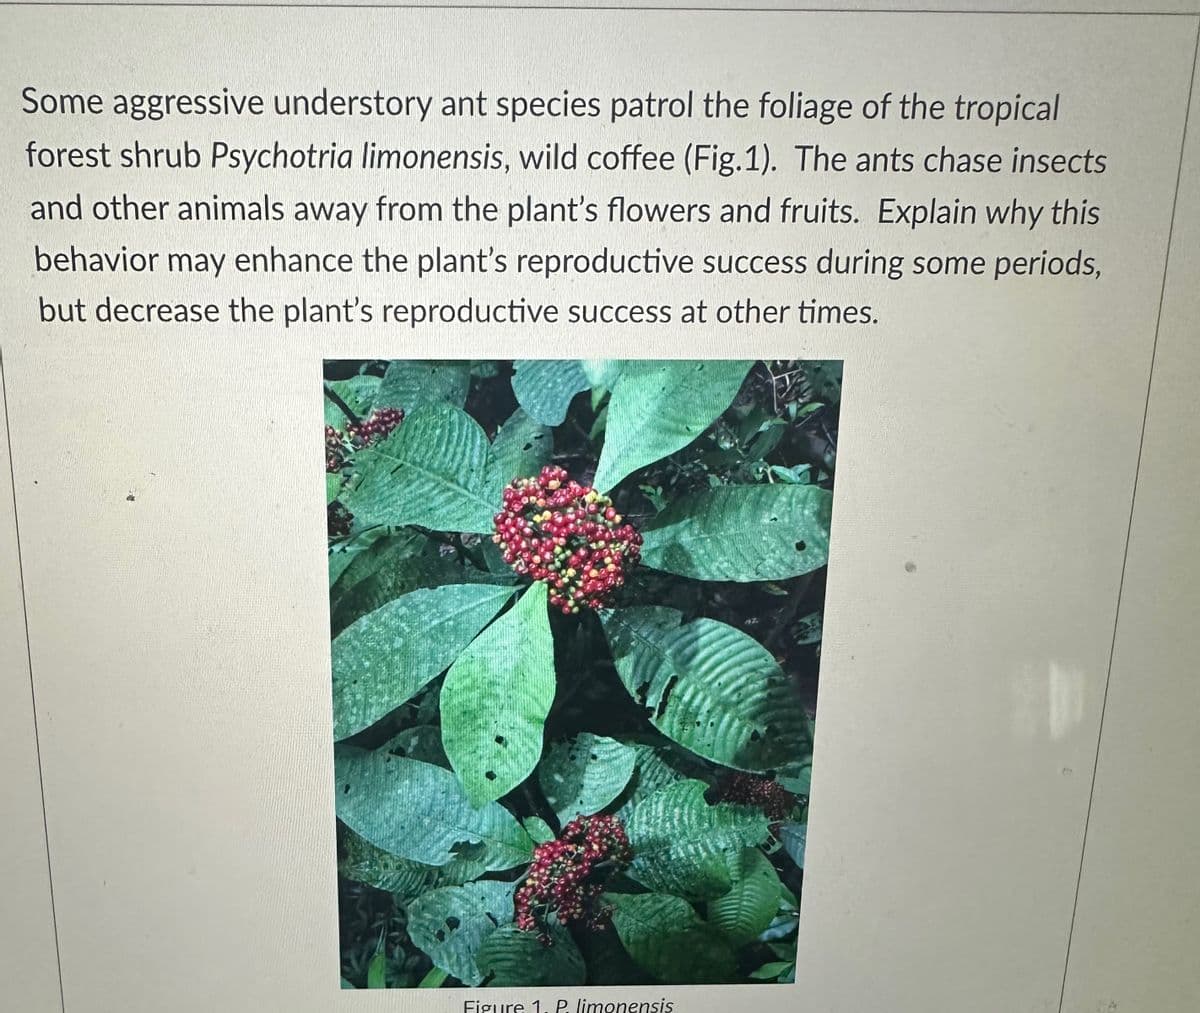 Some aggressive understory ant species patrol the foliage of the tropical
forest shrub Psychotria limonensis, wild coffee (Fig.1). The ants chase insects
and other animals away from the plant's flowers and fruits. Explain why this
behavior may enhance the plant's reproductive success during some periods,
but decrease the plant's reproductive success at other times.
Figure 1. P. limonensis
V